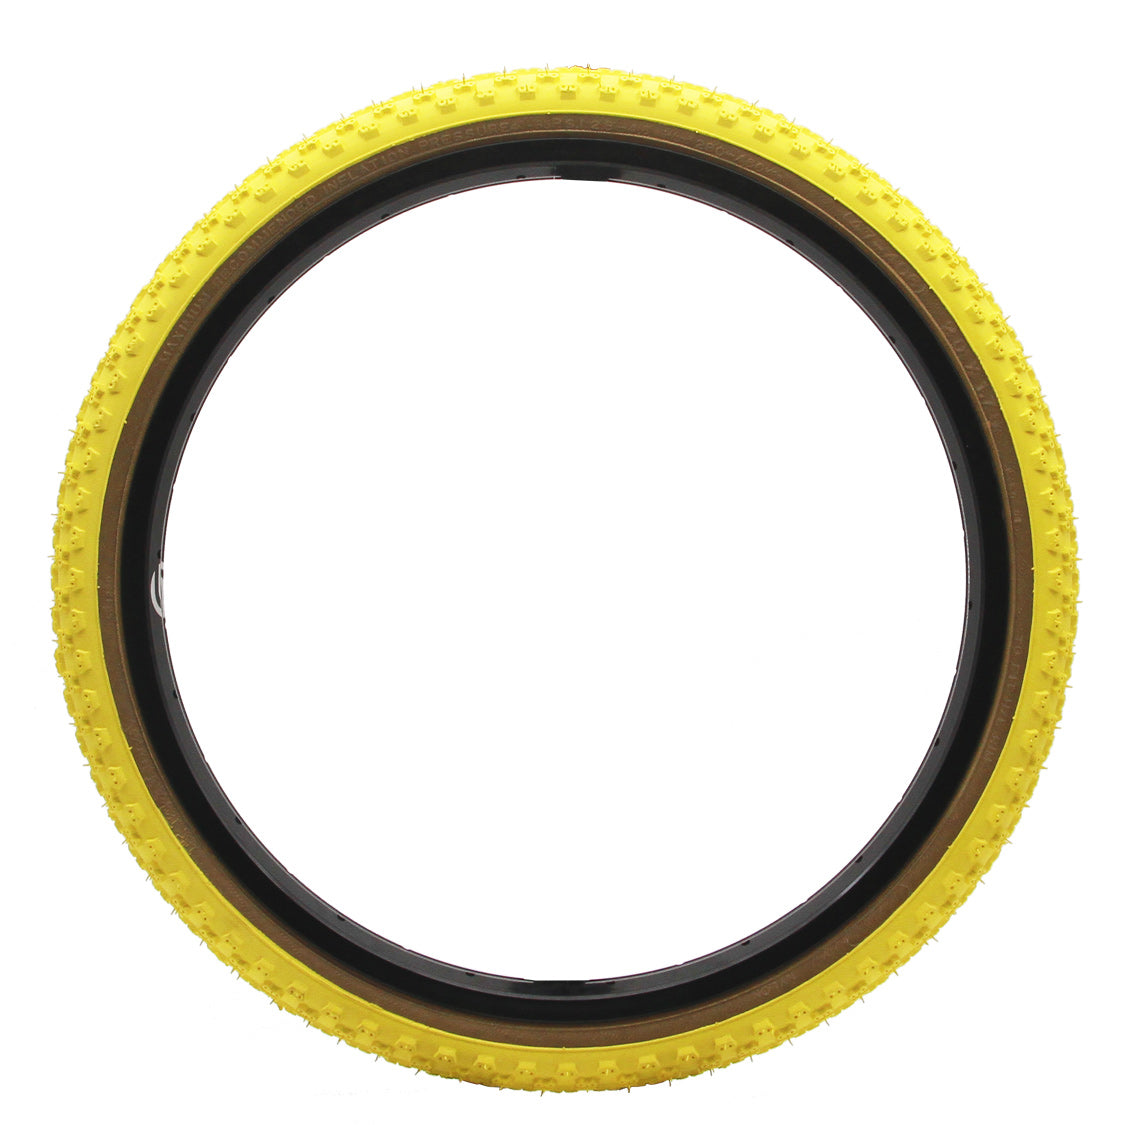 Yellow 20 Inch Kenda K50 Tyre with Classic Comp III tread design, isolated on a white background.